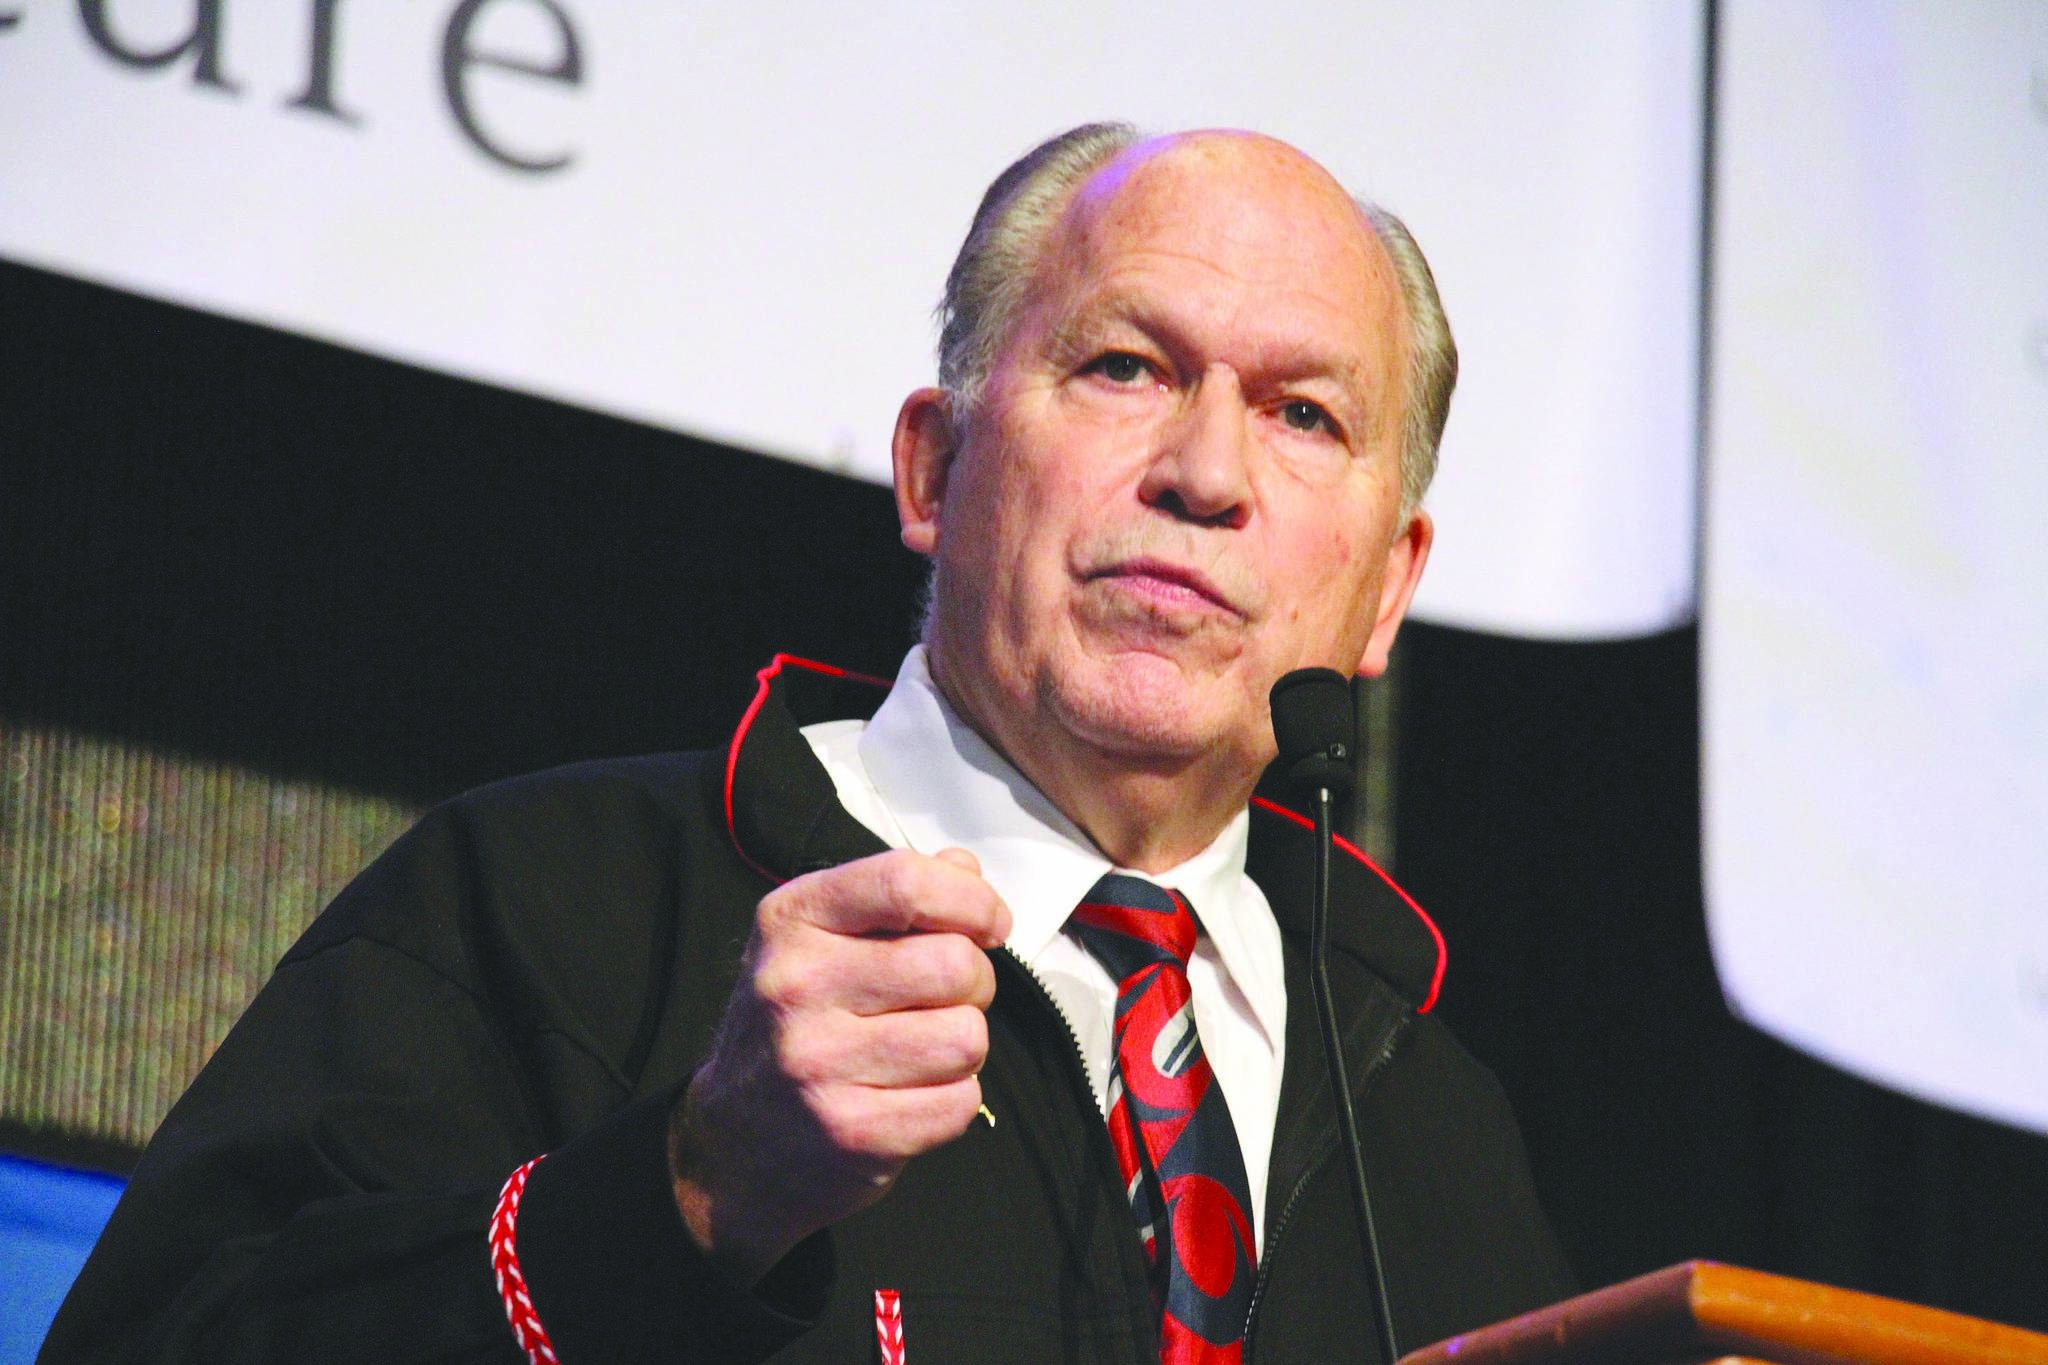 In this Oct. 18, 2018, file photo, then-Alaska Gov. Bill Walker addresses delegates at the annual Alaska Federation of Natives conference in Anchorage, Alaska. (AP Photo/Mark Thiessen, File)